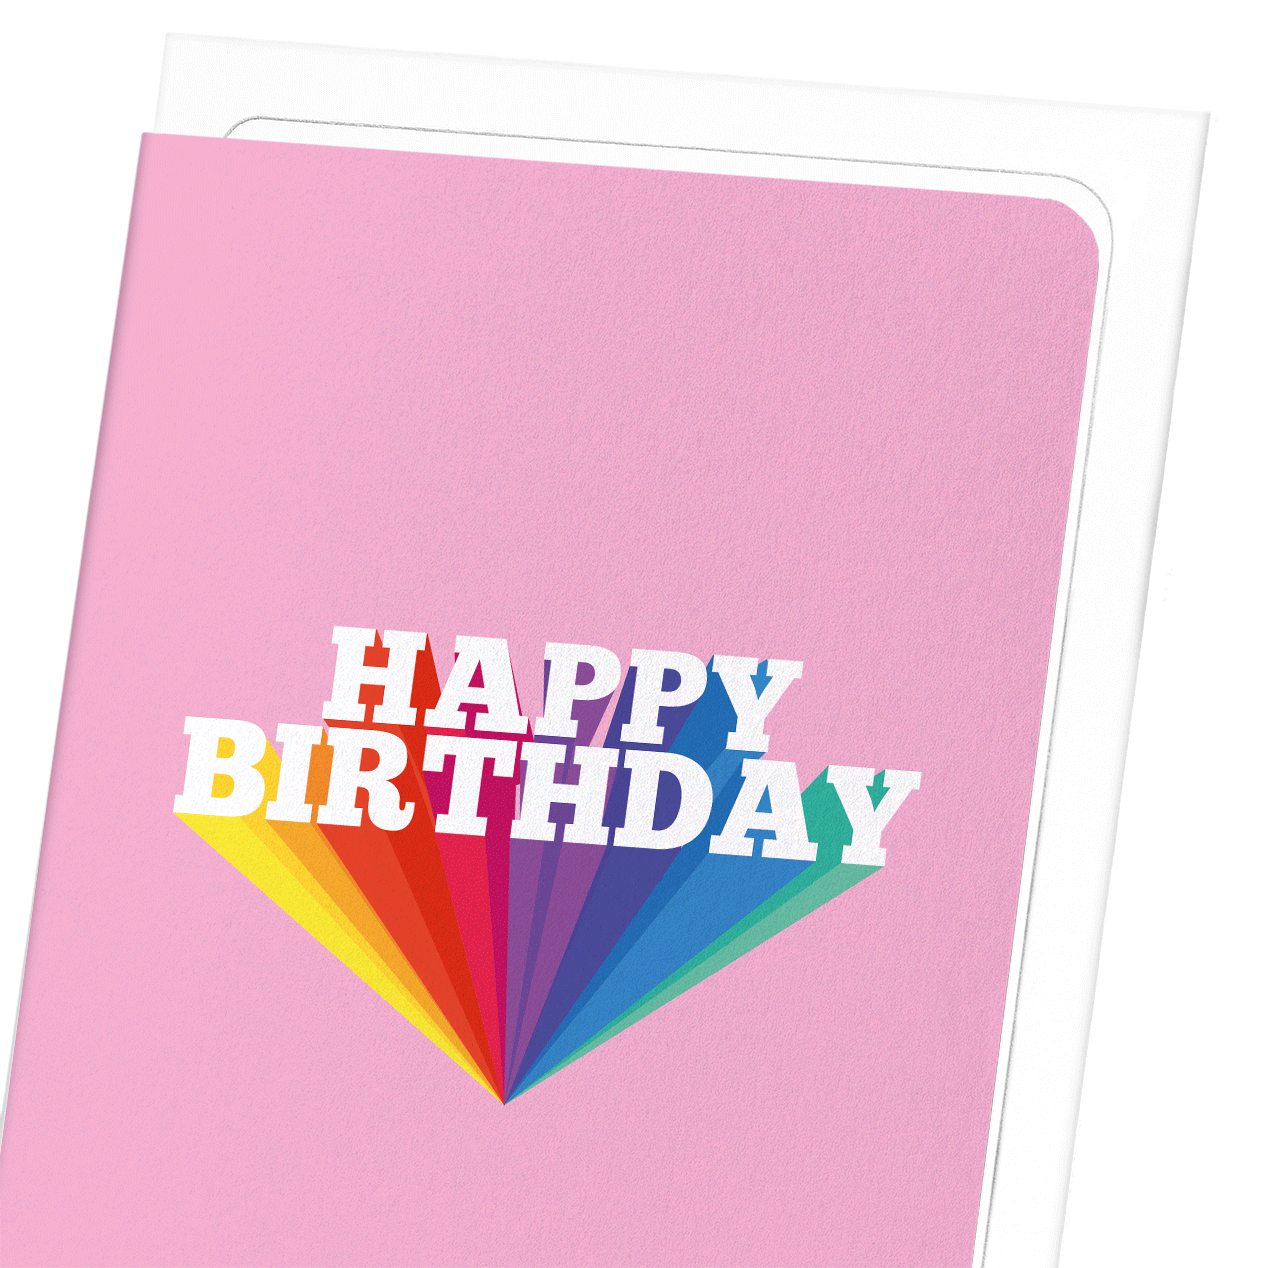 HAPPY BIRTHDAY IN PINK: Colourblock Greeting Card